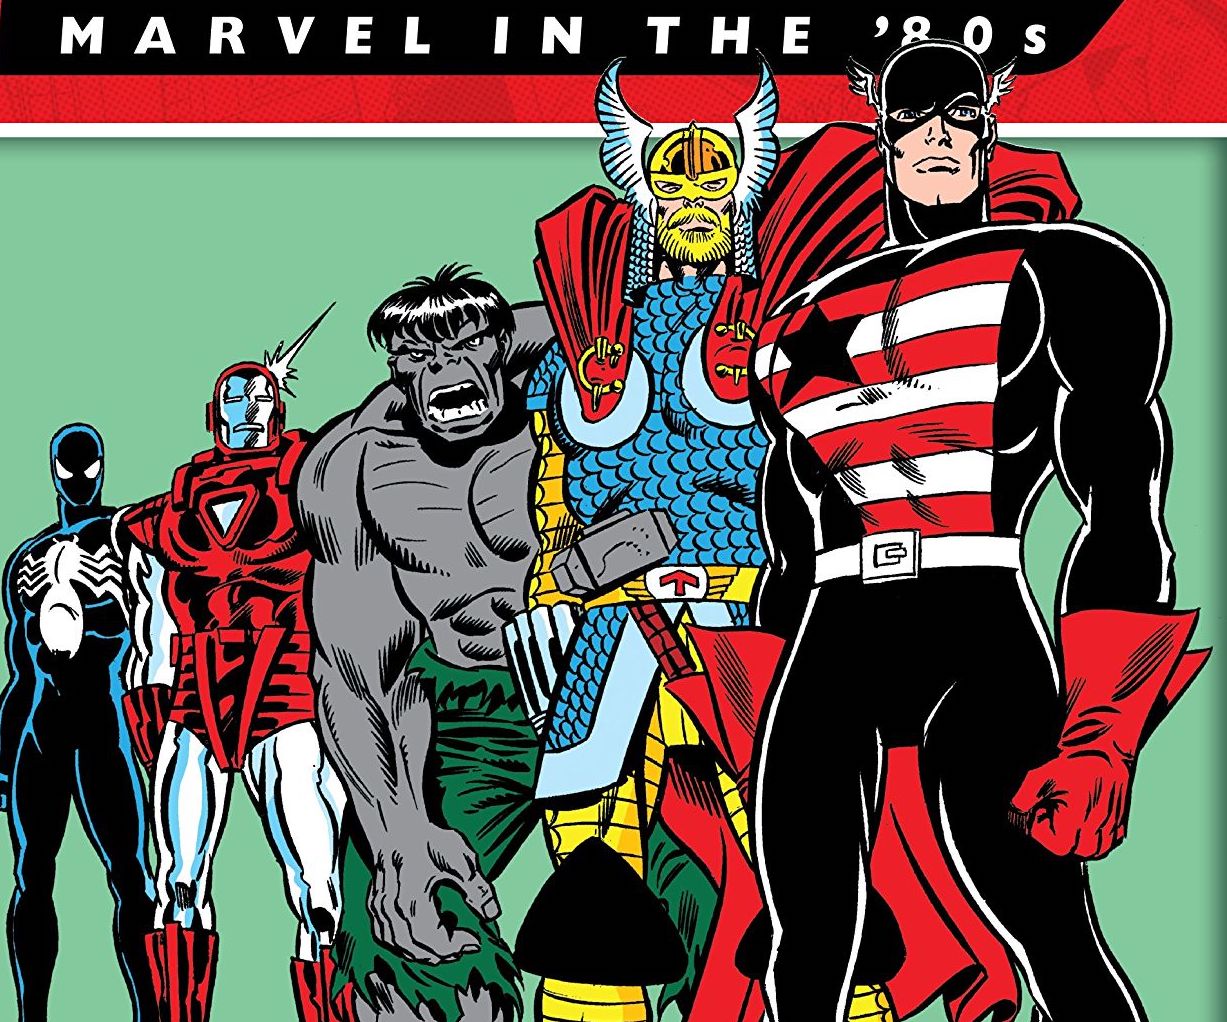 Decades: Marvel in the 80s - Awesome Evolutions Review